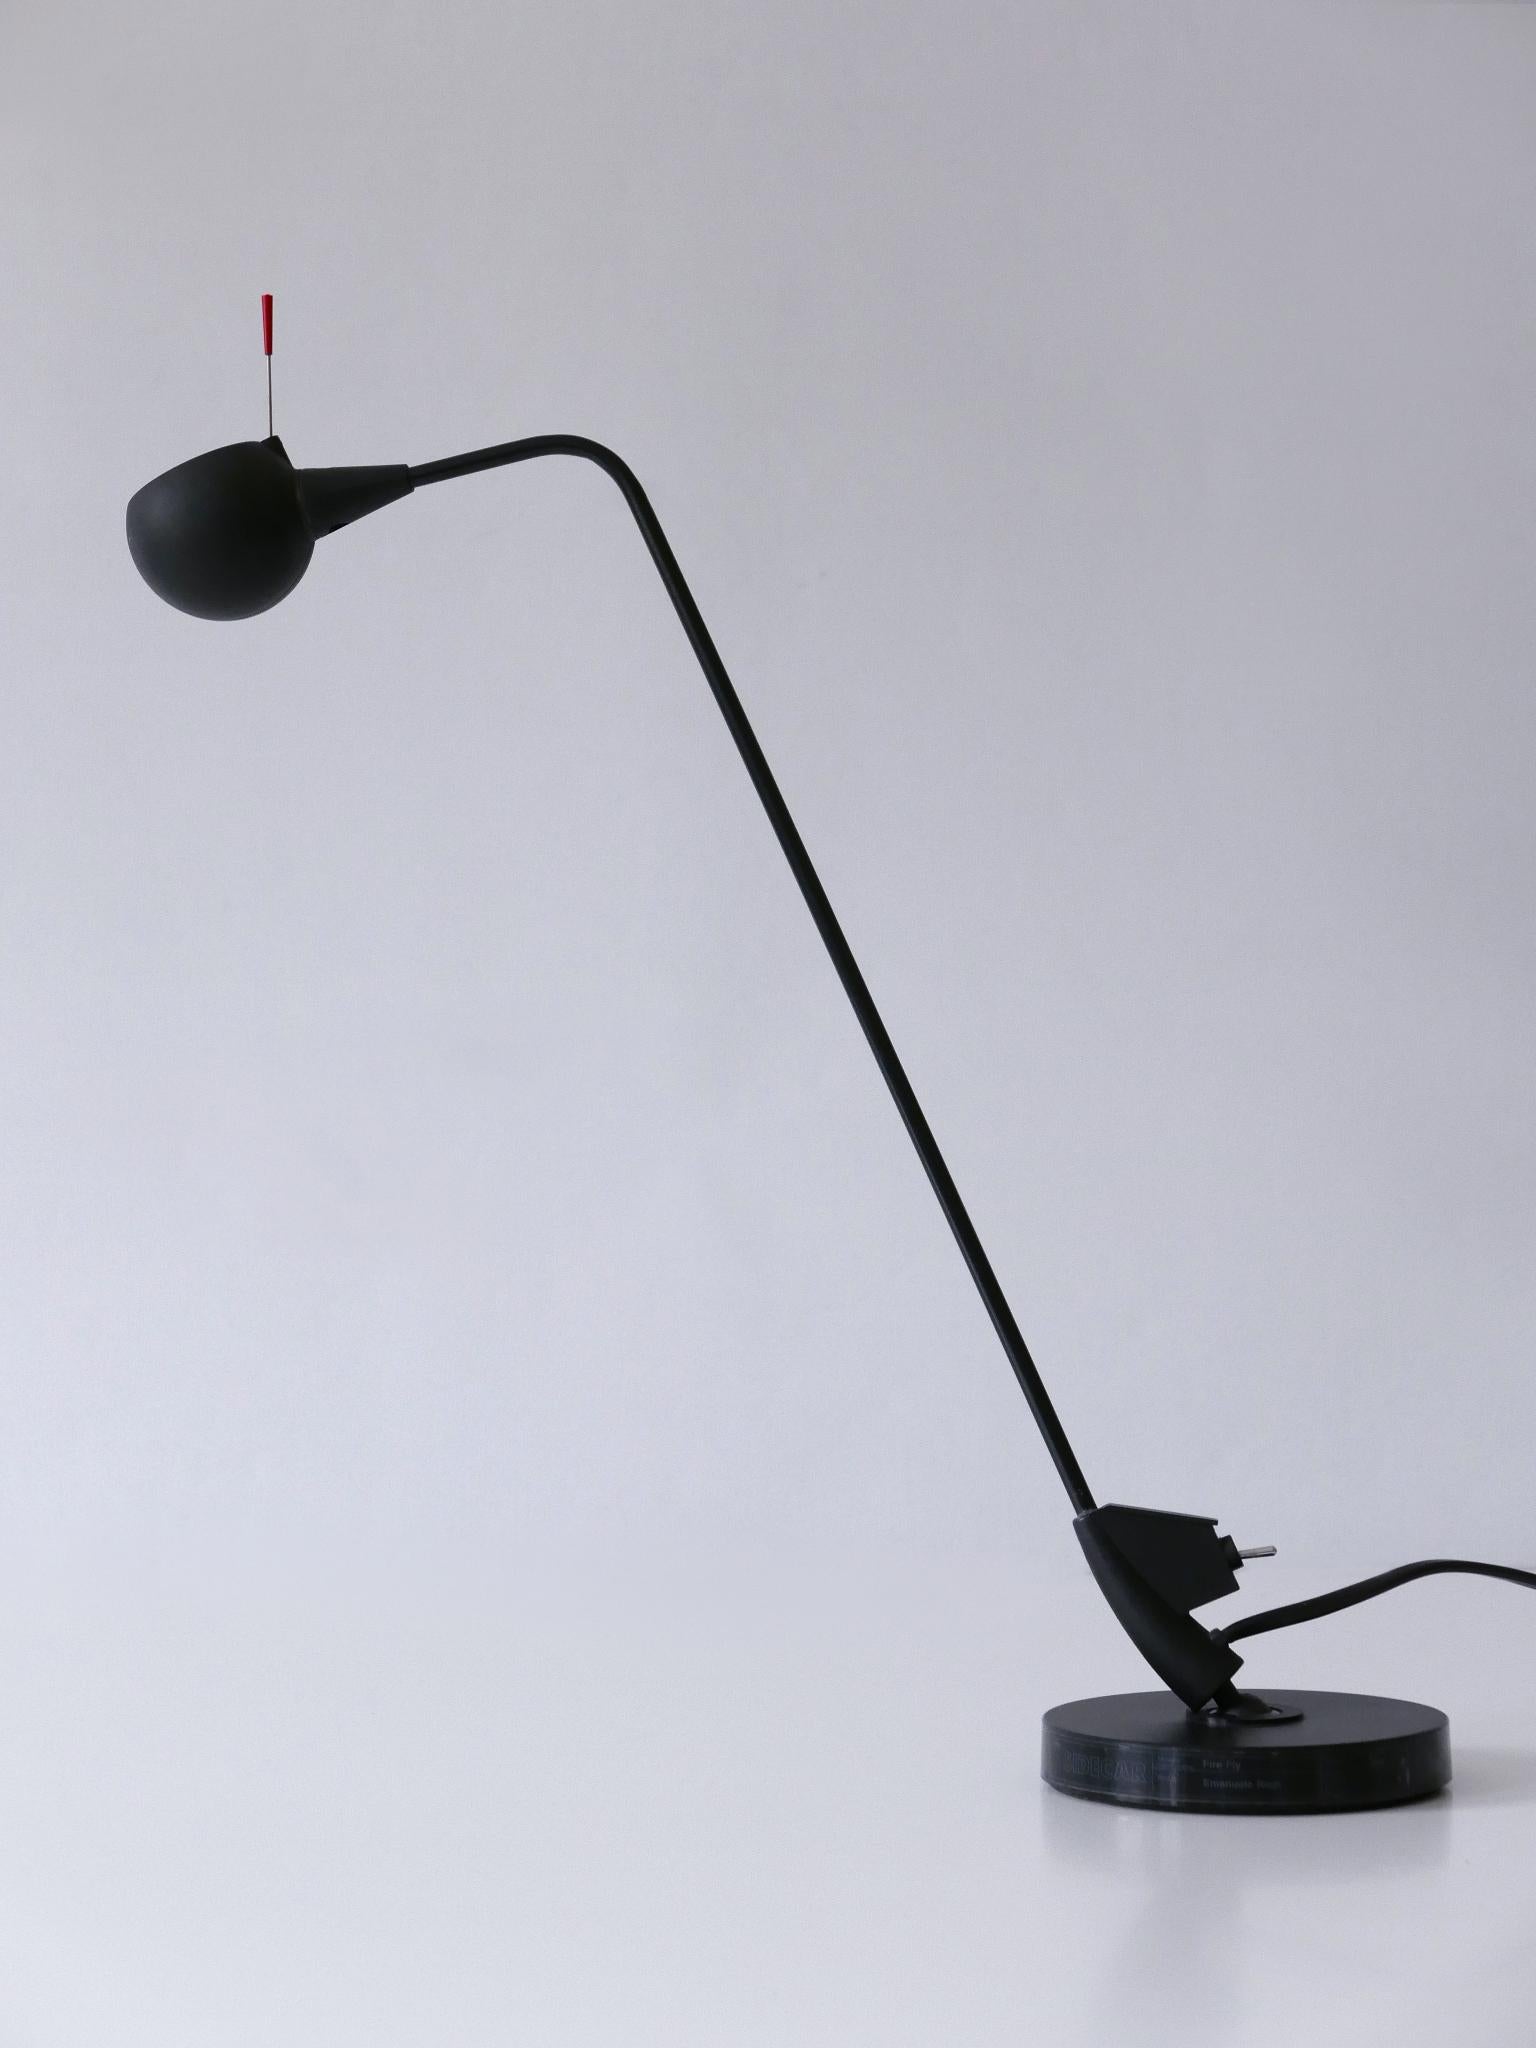 Adjustable Postmodern Table Lamp Fire Fly by Emanuele Ricci for Artemide 1989 For Sale 6